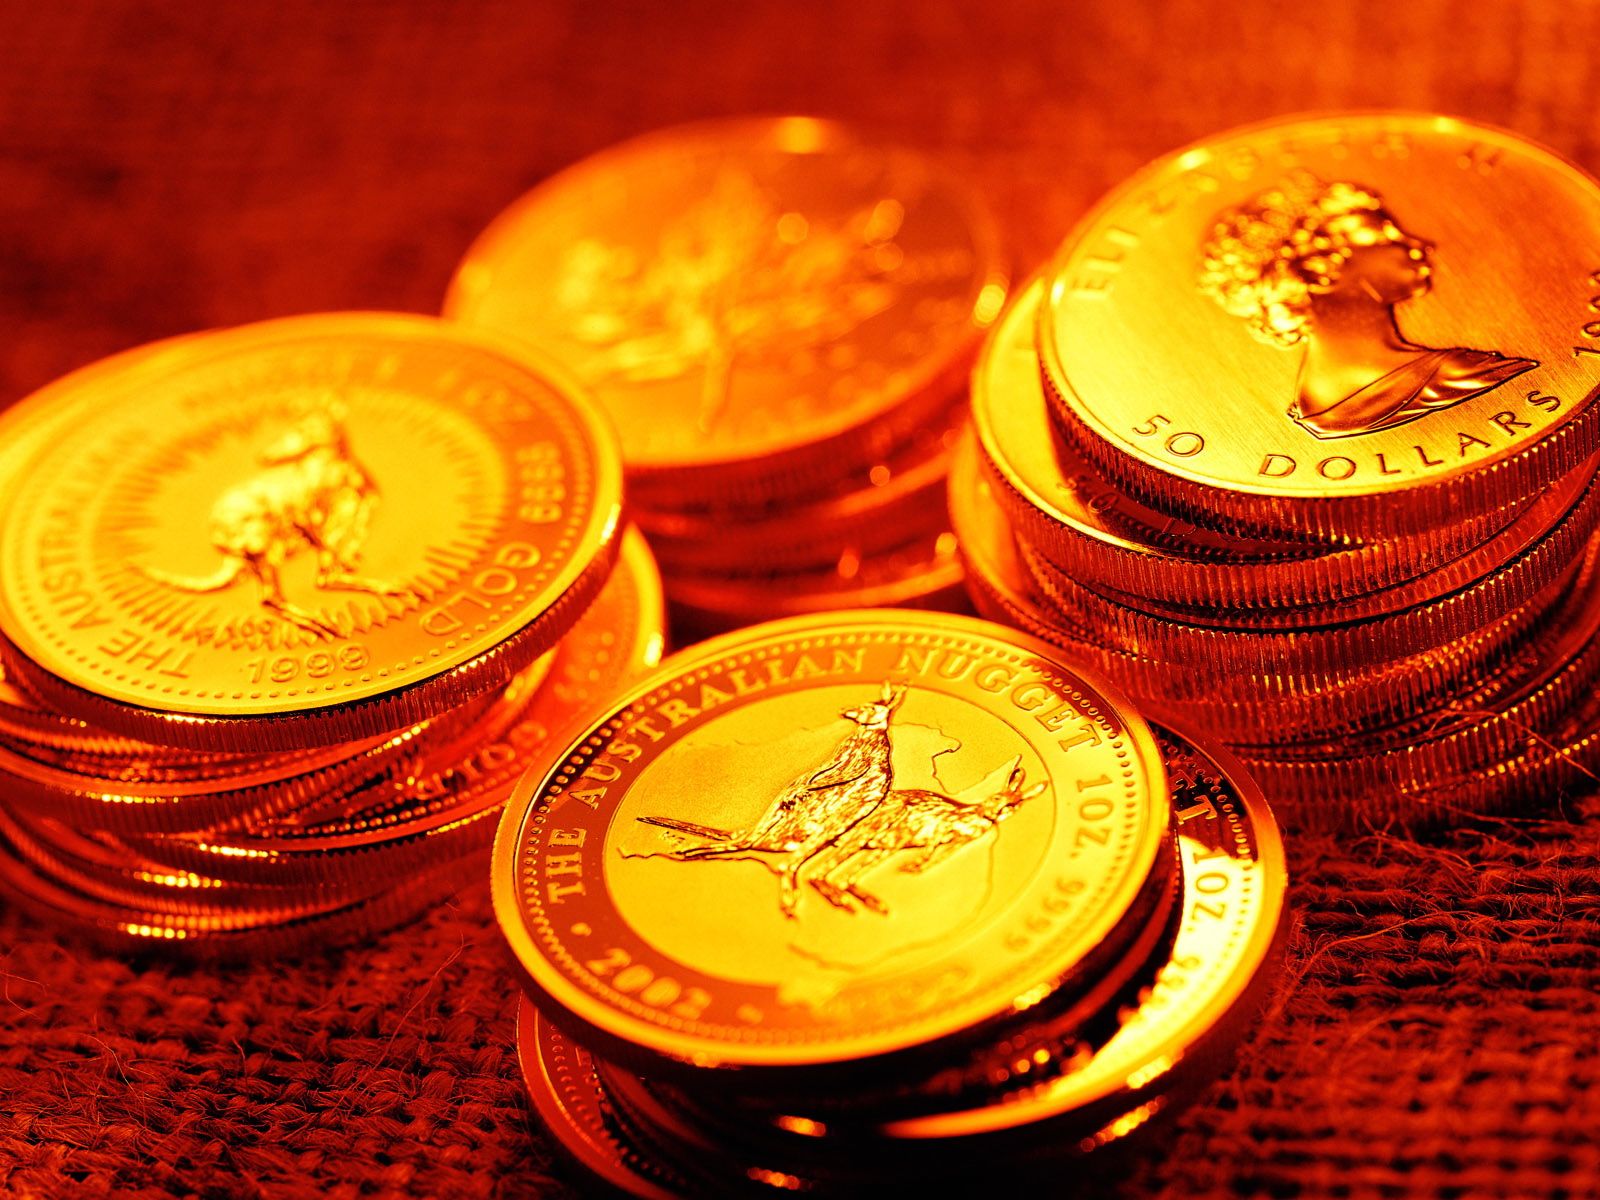 Free download Australian gold coins wallpaper and image